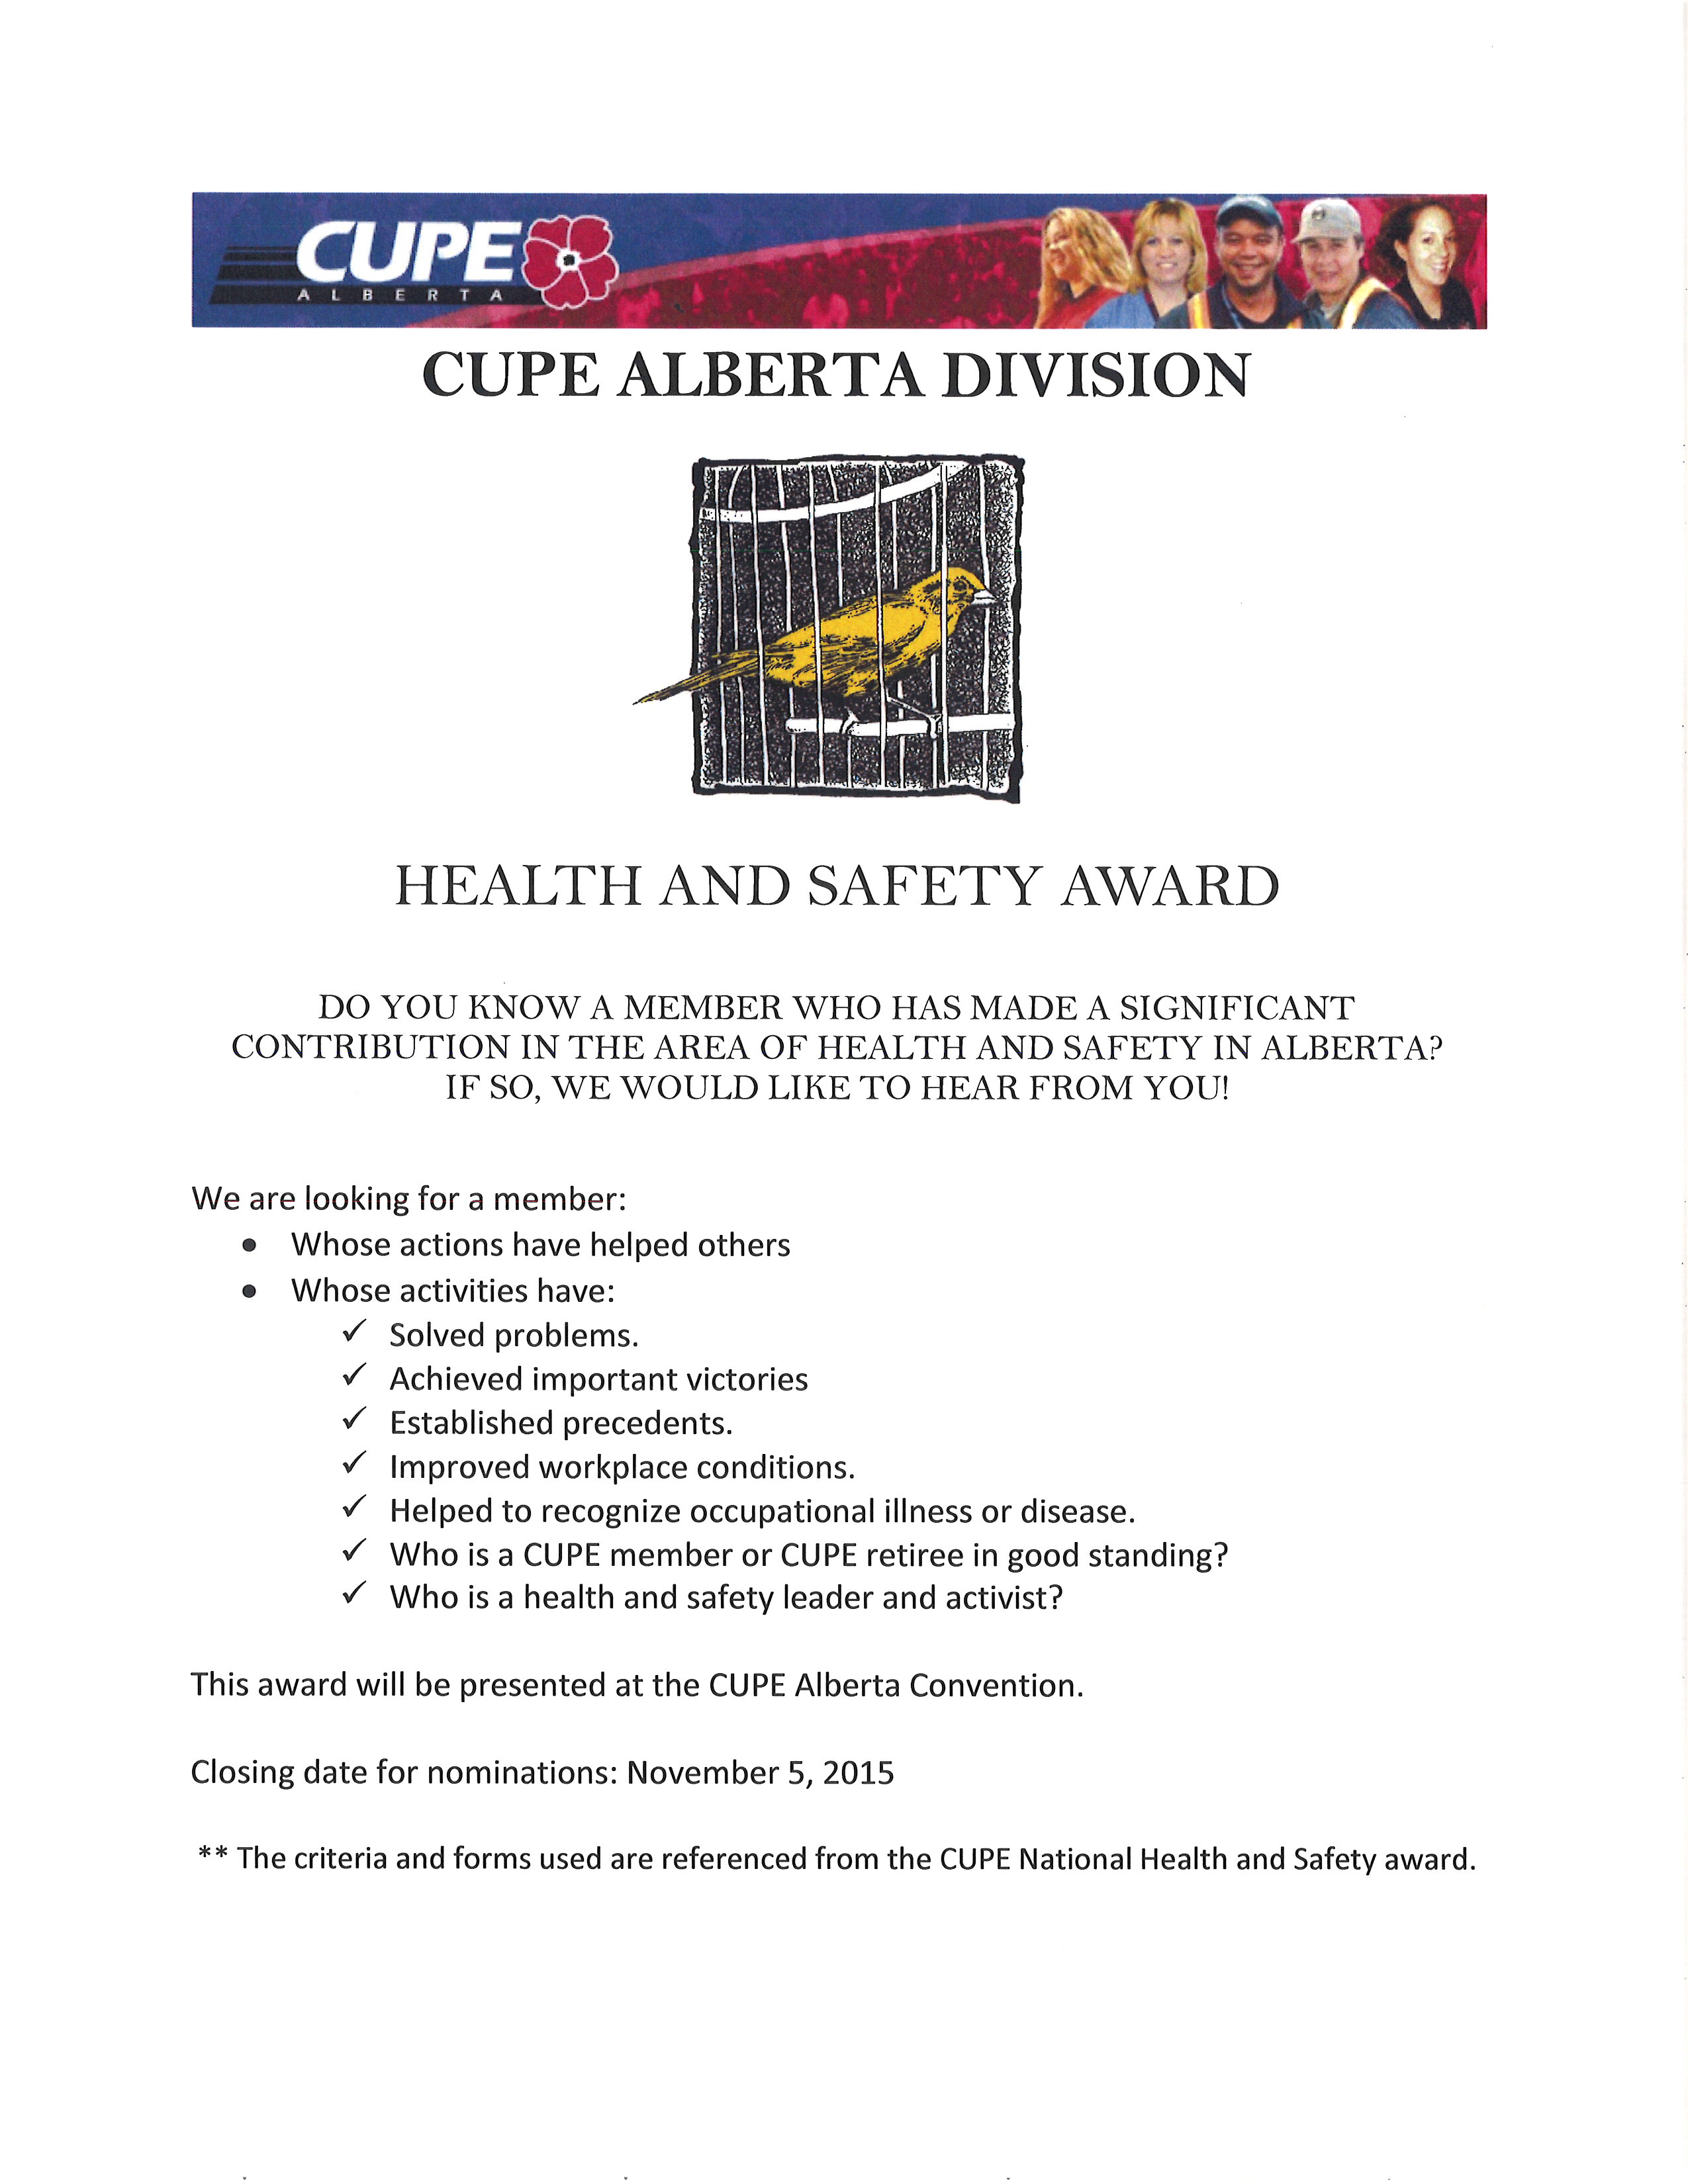 CUPE ALBERTA DIVISION HEALTH AND SAFETY AWARD FLYER